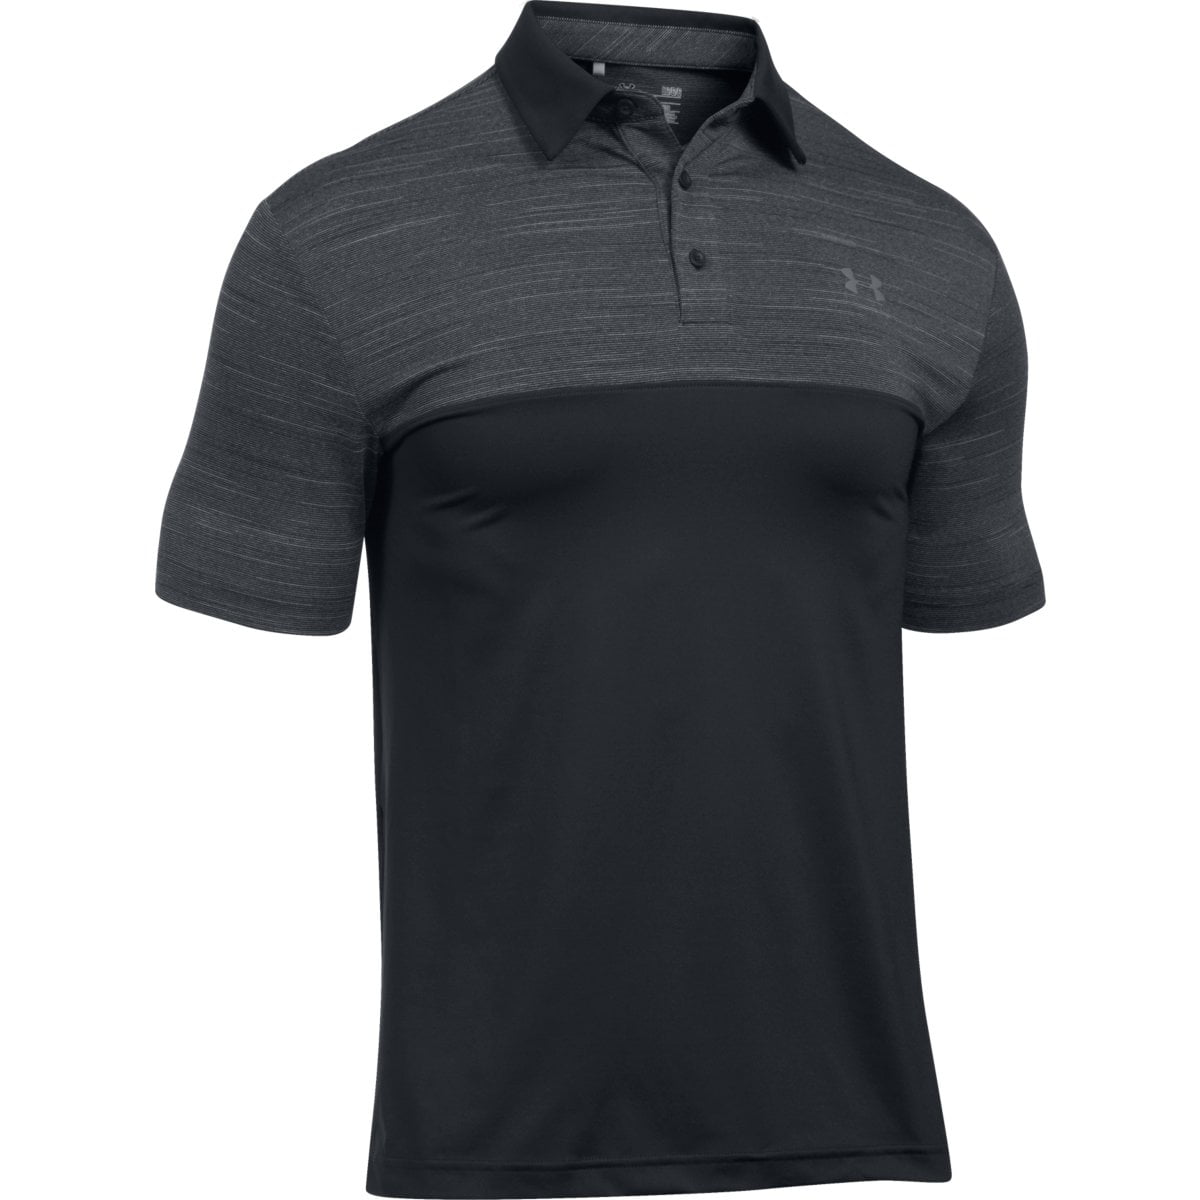 Stormtech Men/'s Sports Performance Polo Shirt PS-1 Collared Casual T-shirt